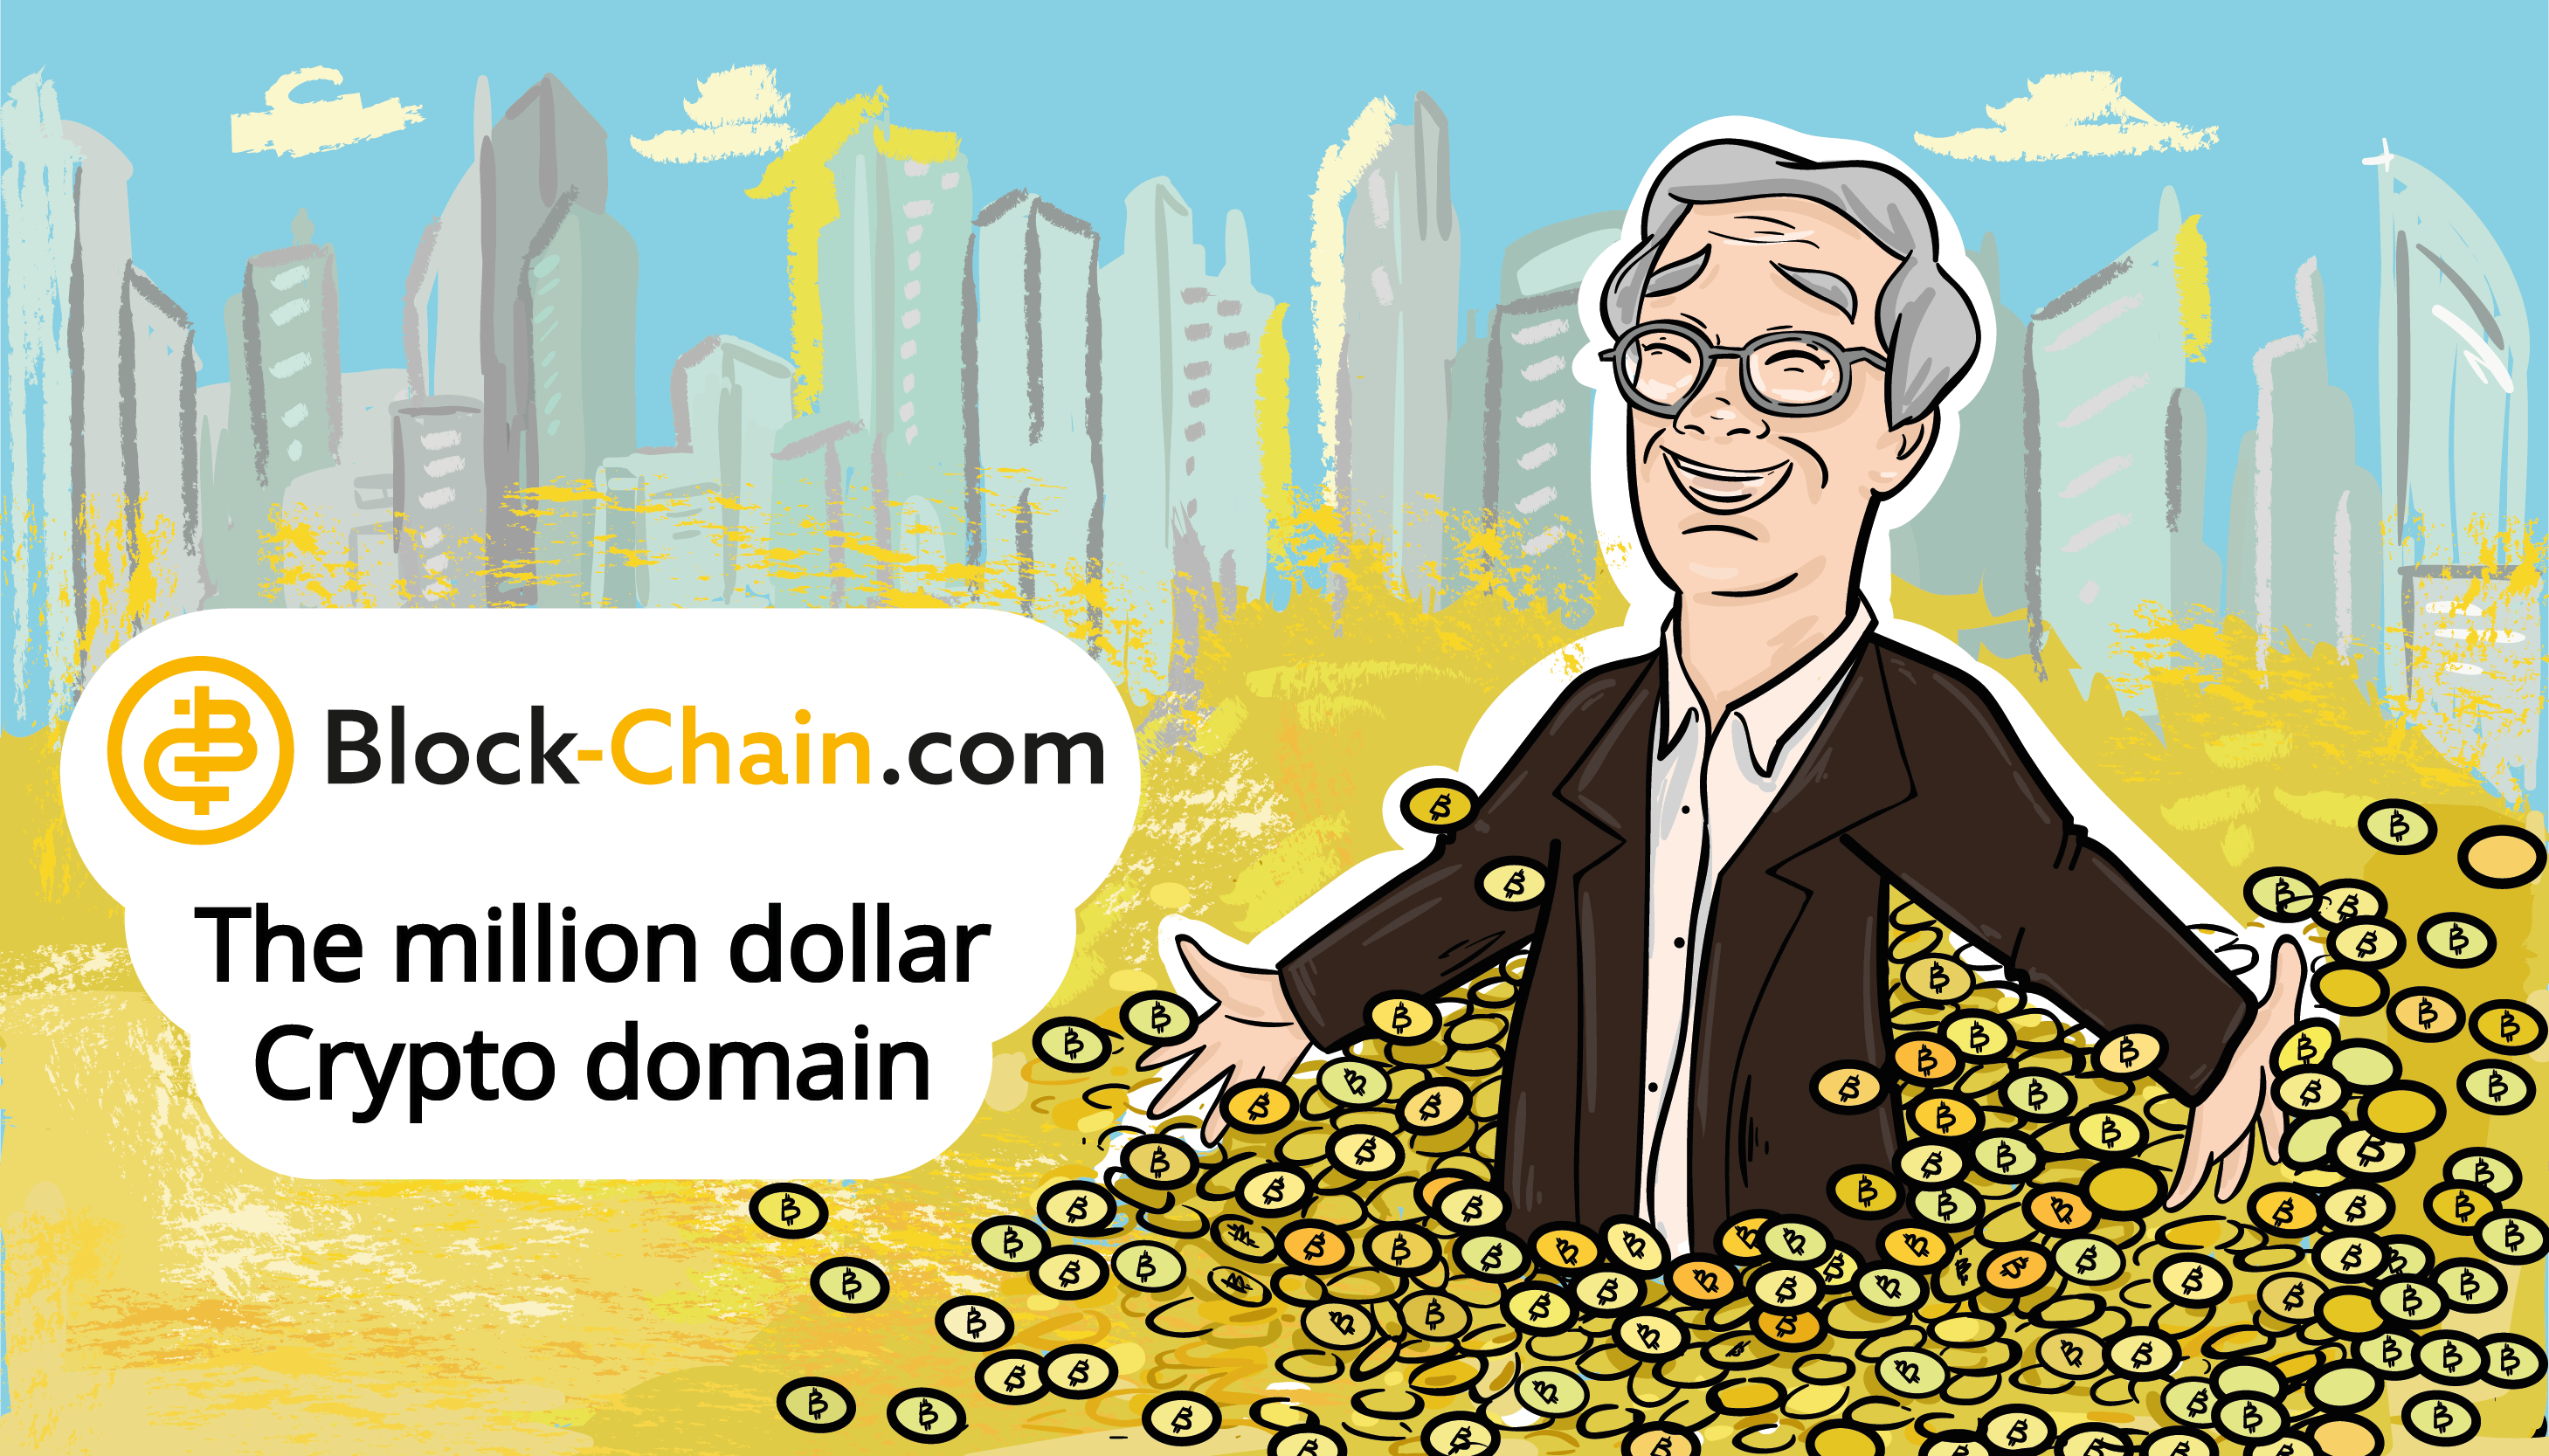 The Cryptocurrency Domain Name Block-Chain.Com Has Been Acquired for $1,000,000